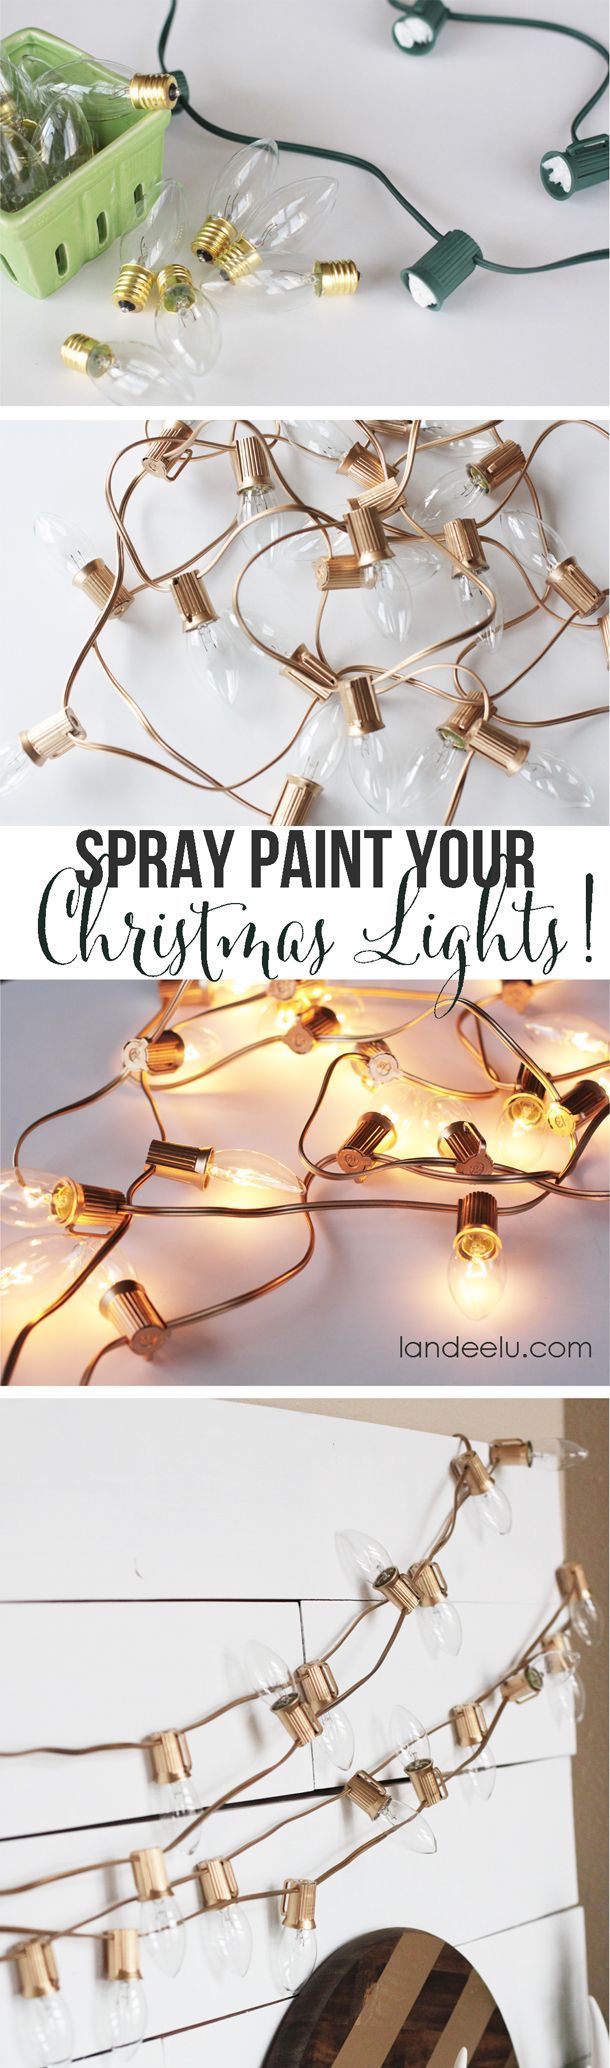 Spray Paint Your Christmas Lights! Who would have thought!